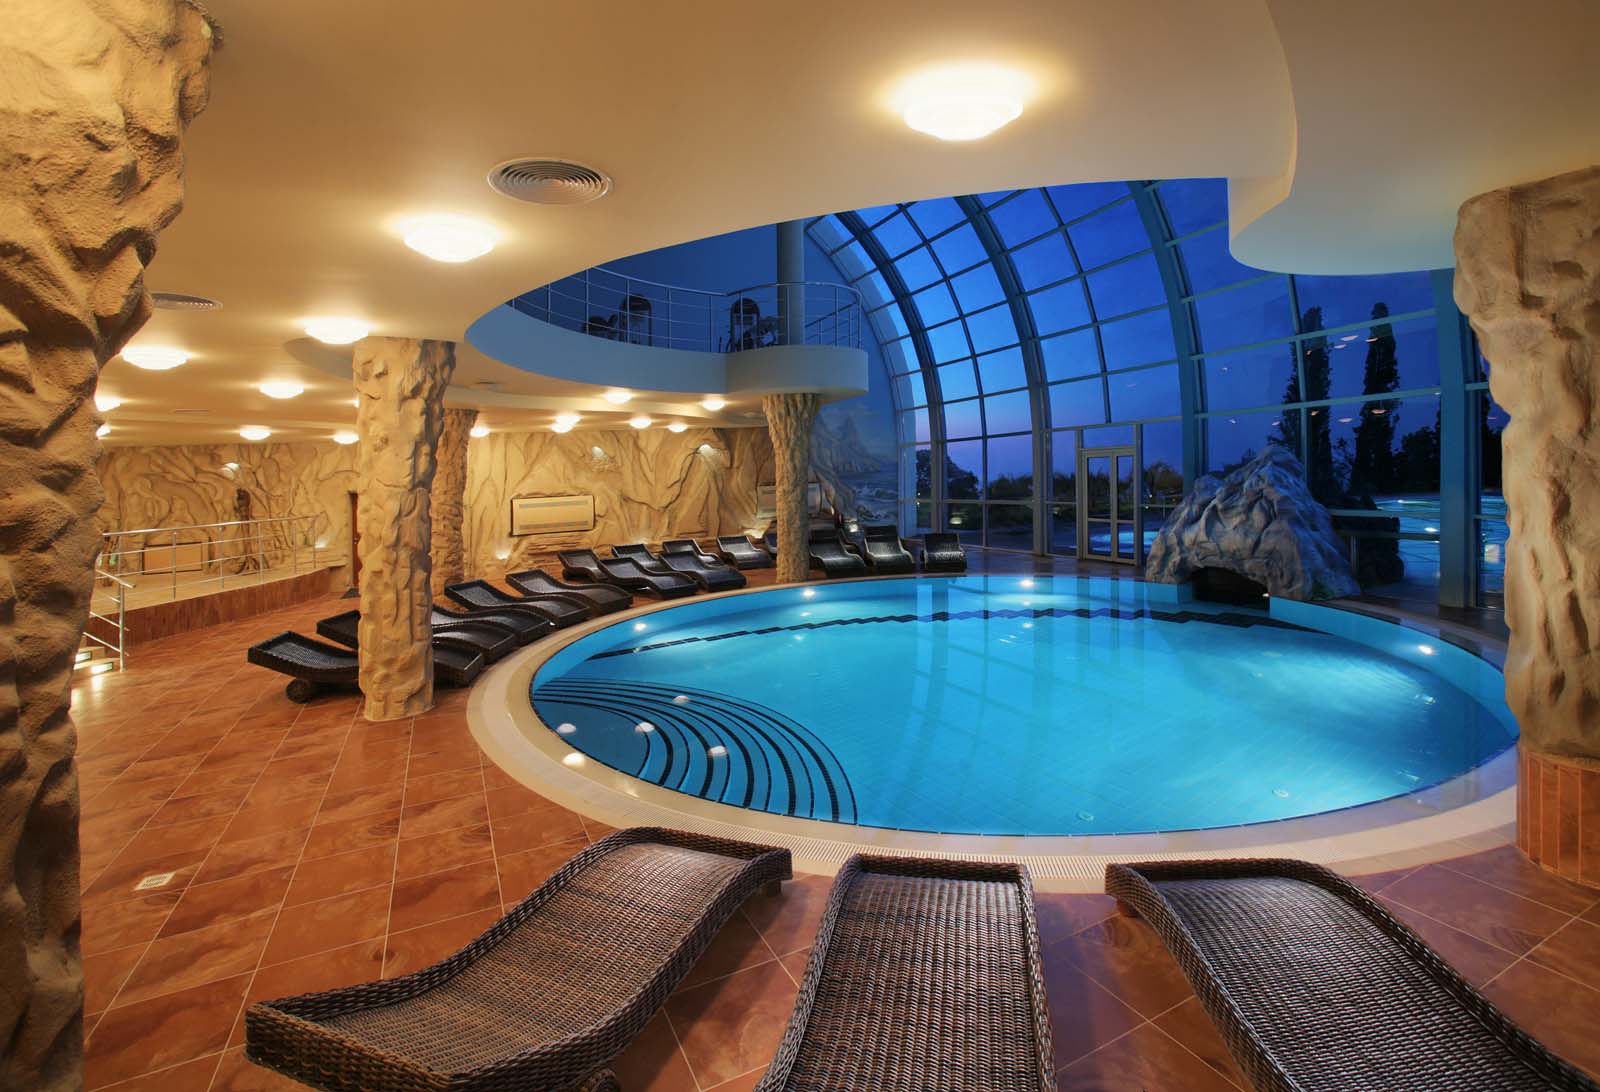 admirable indoor living space decoration with round indoor swimming pool and japanese benches